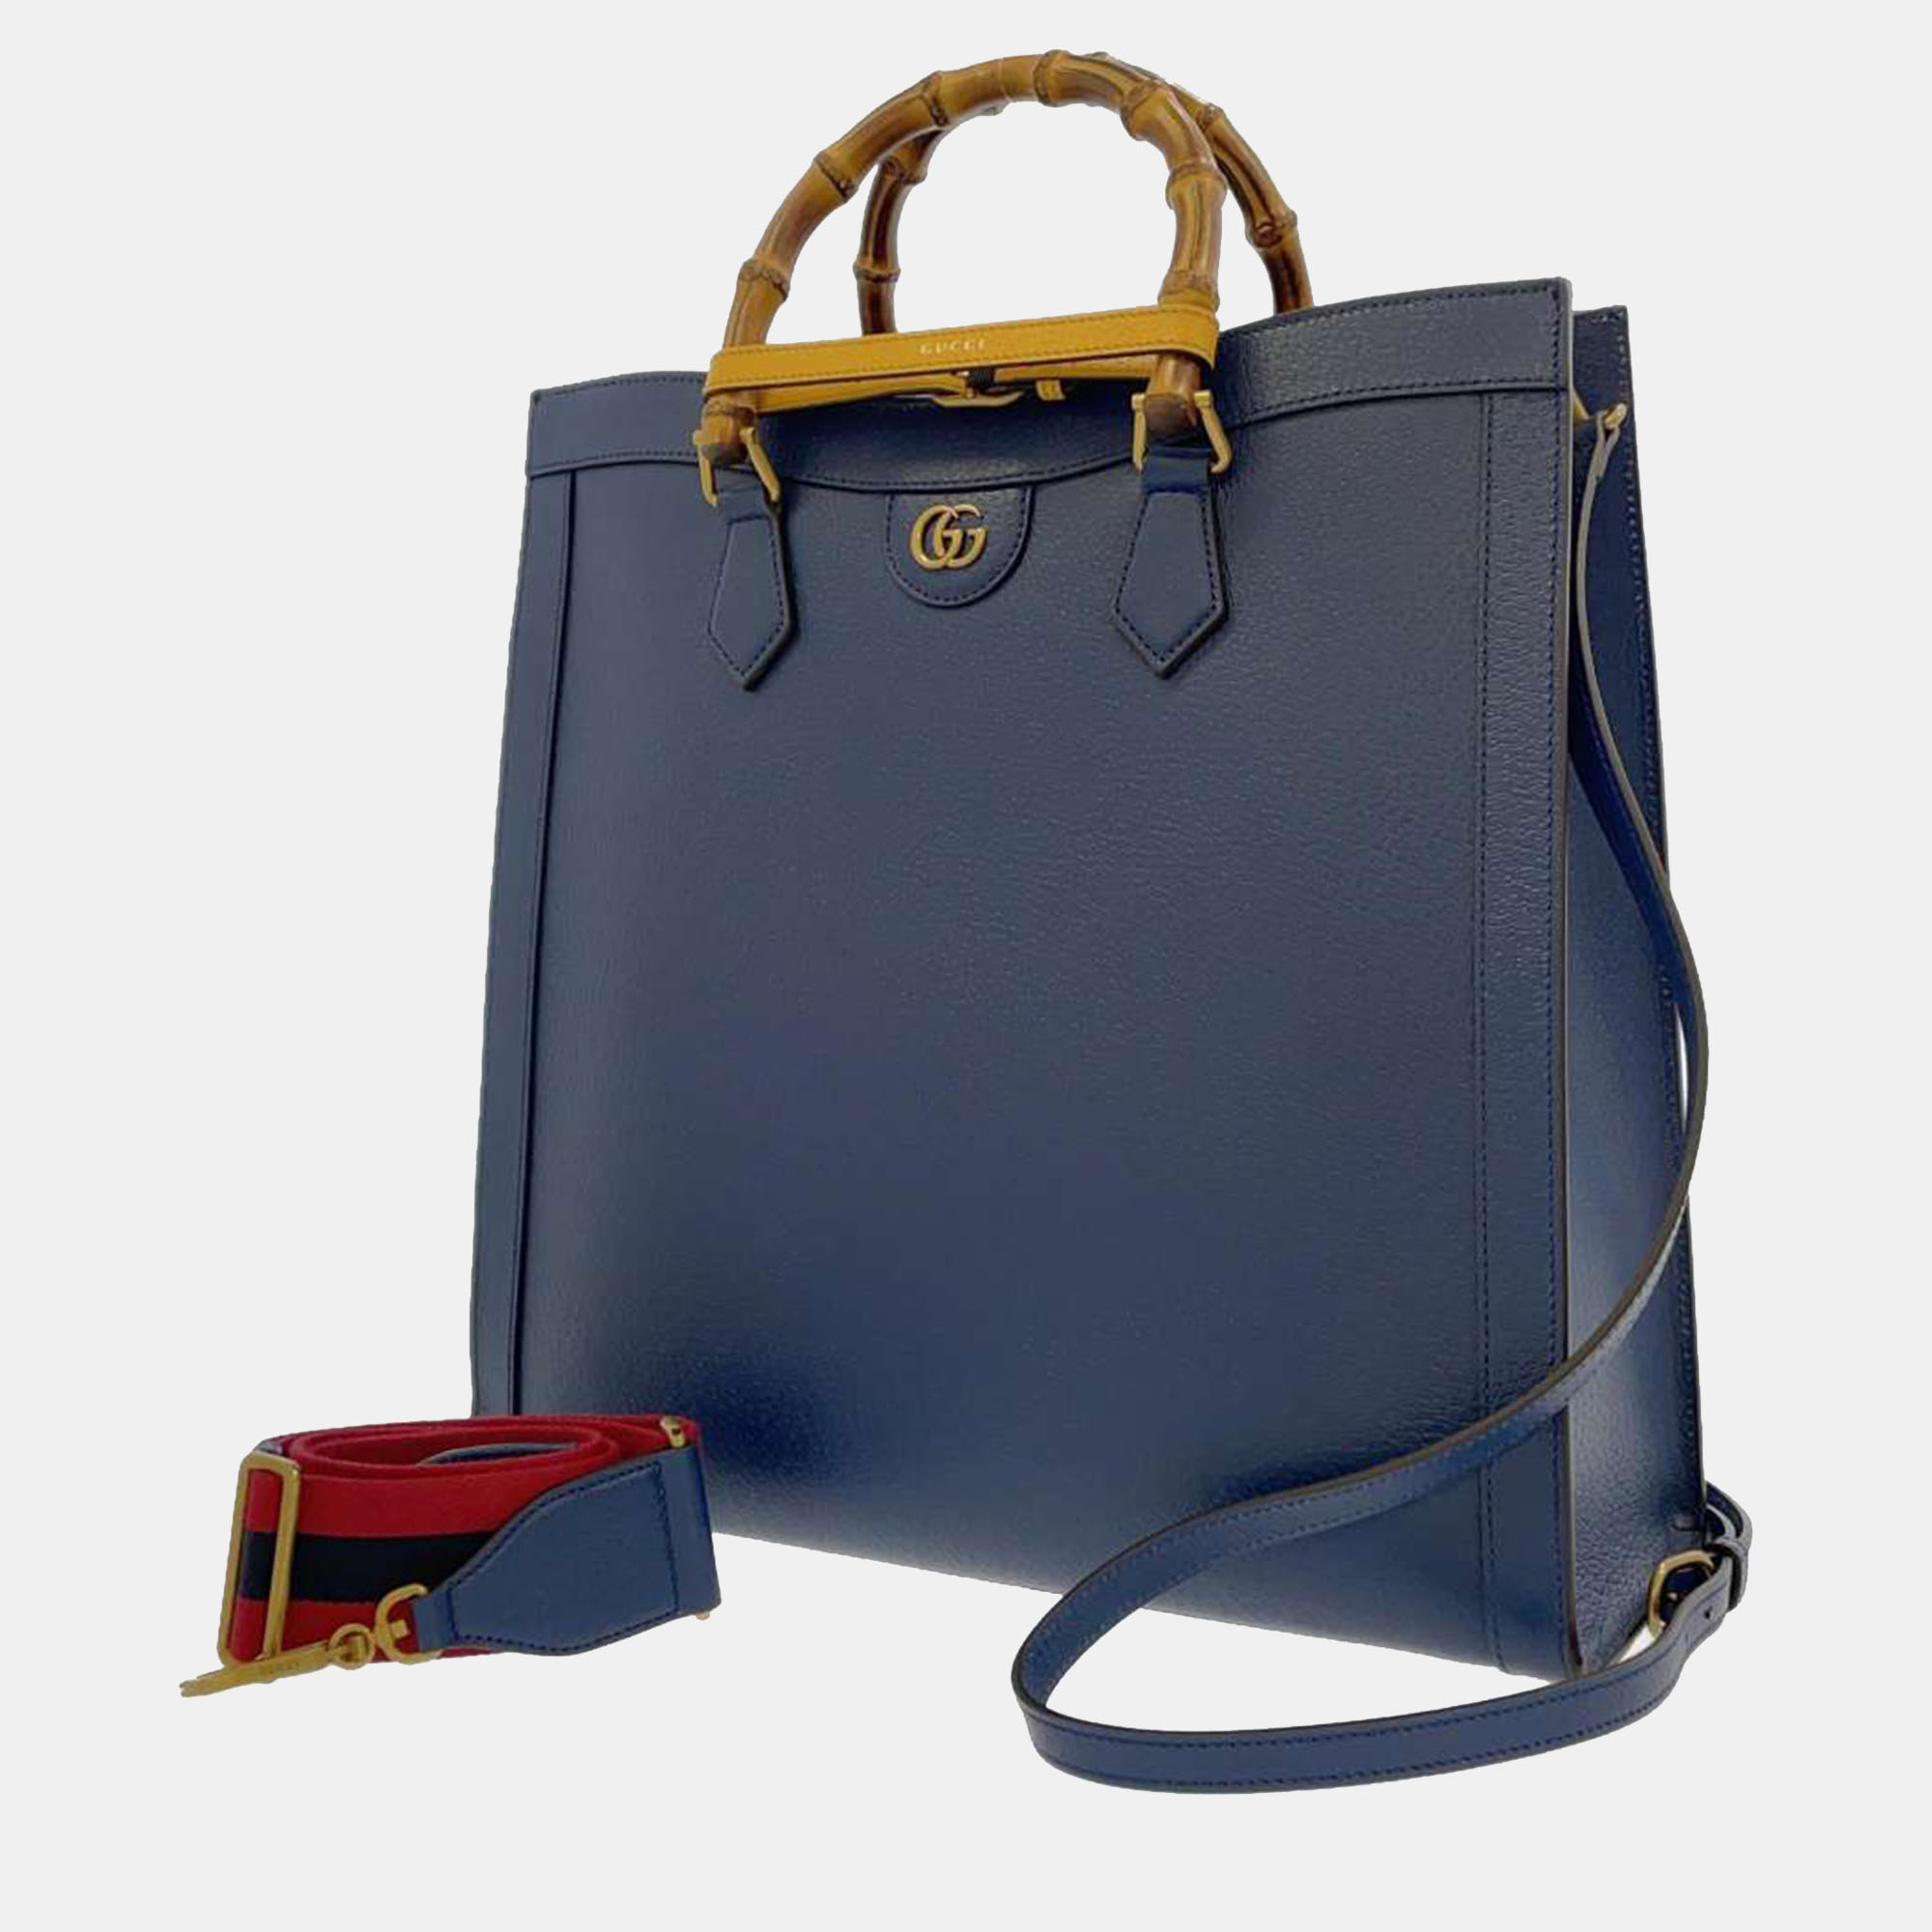 Pre-owned Gucci Blue Leather Large Bamboo Diana Tote Bag